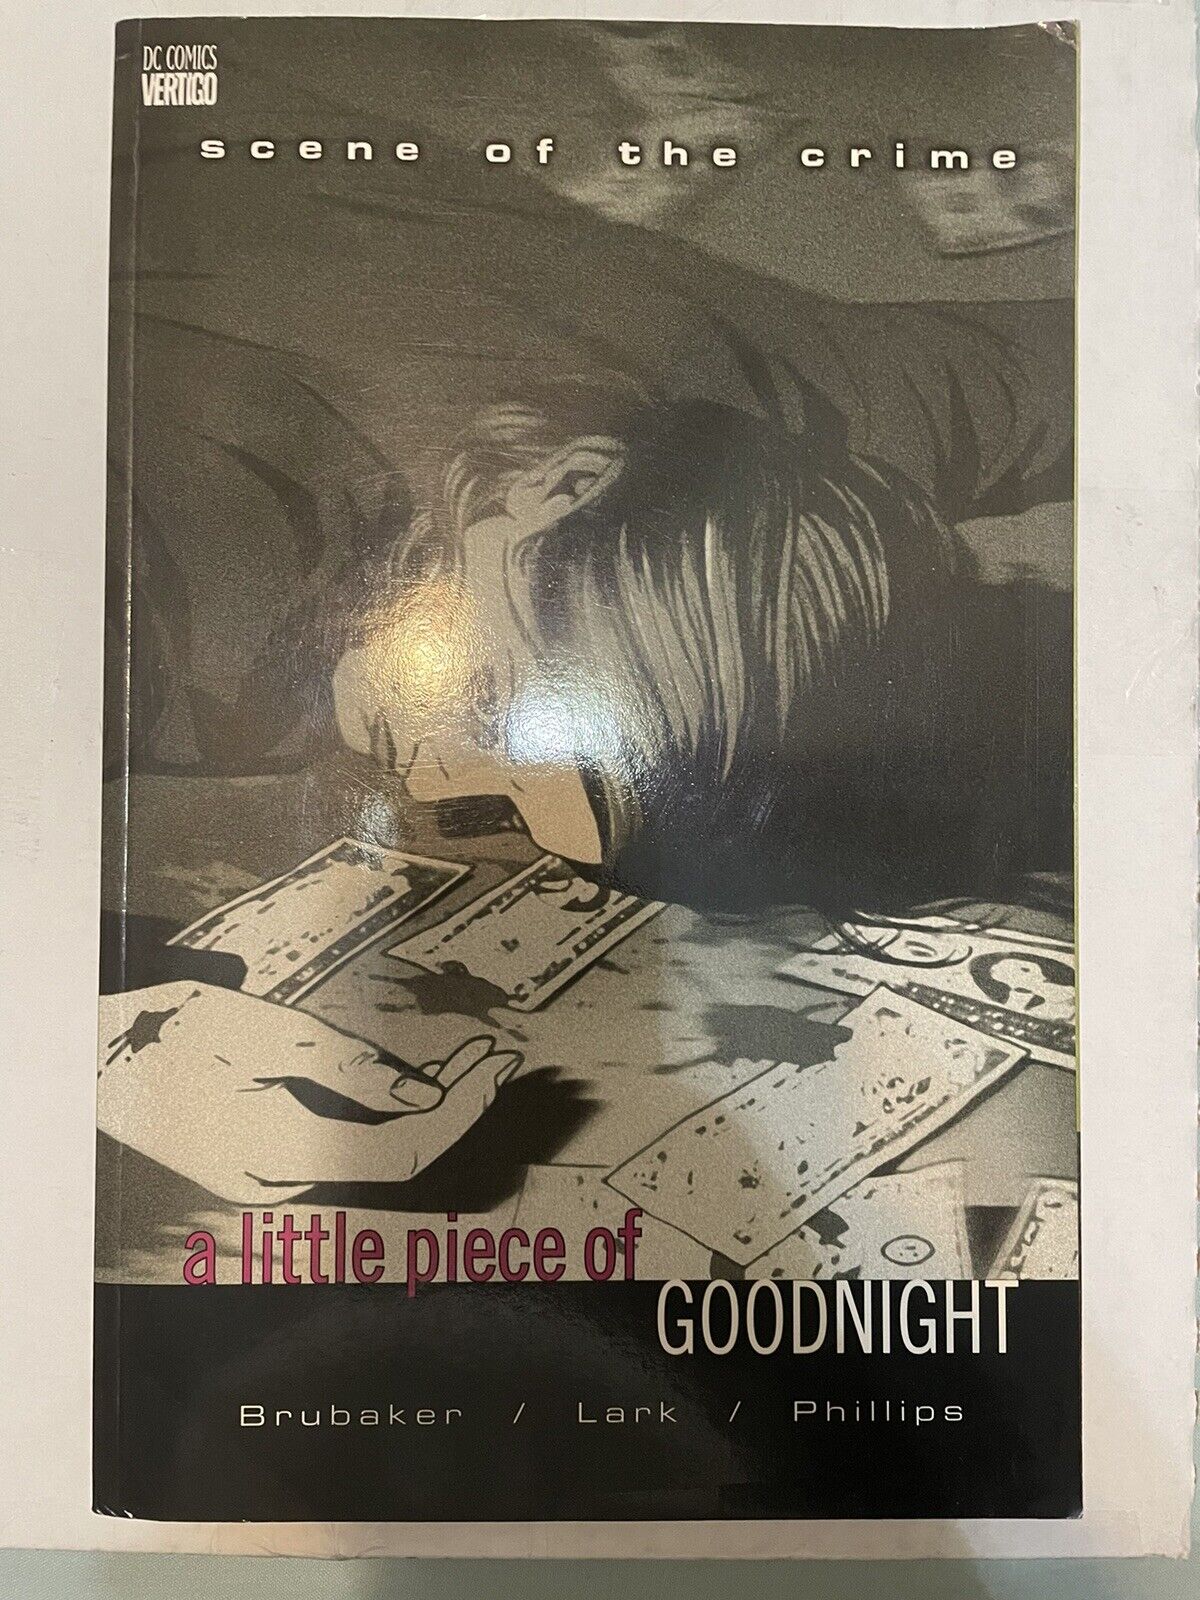 Scene of the Crime: a Little Piece of Goodnight (DC Comics June 2000)